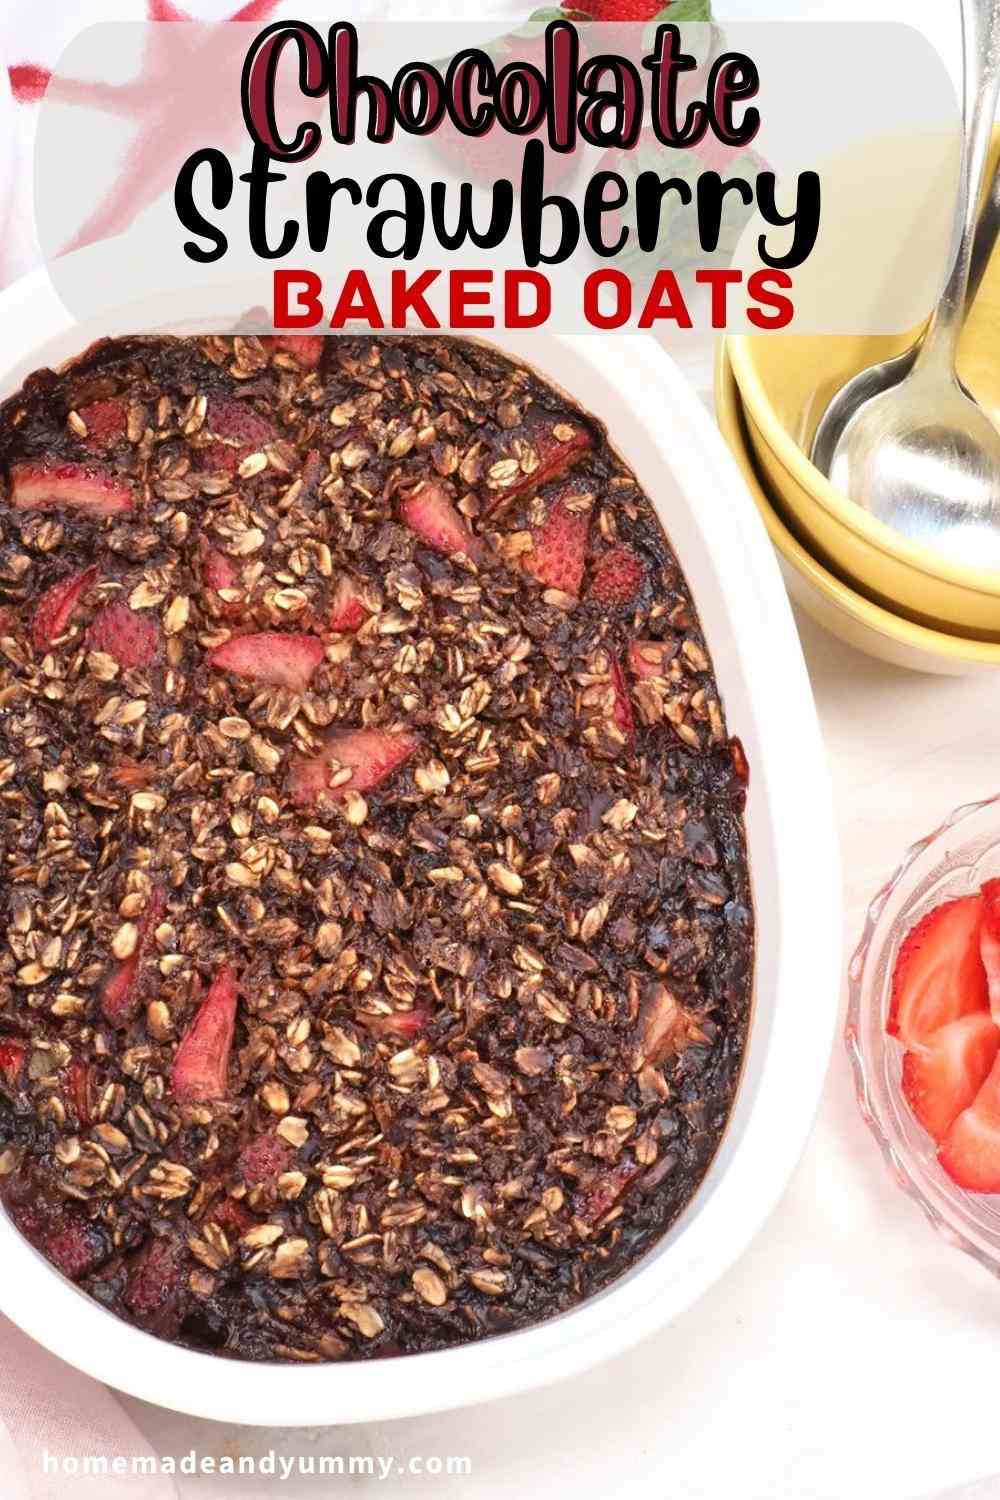 Chocolate Strawberry Baked Oats pin image.